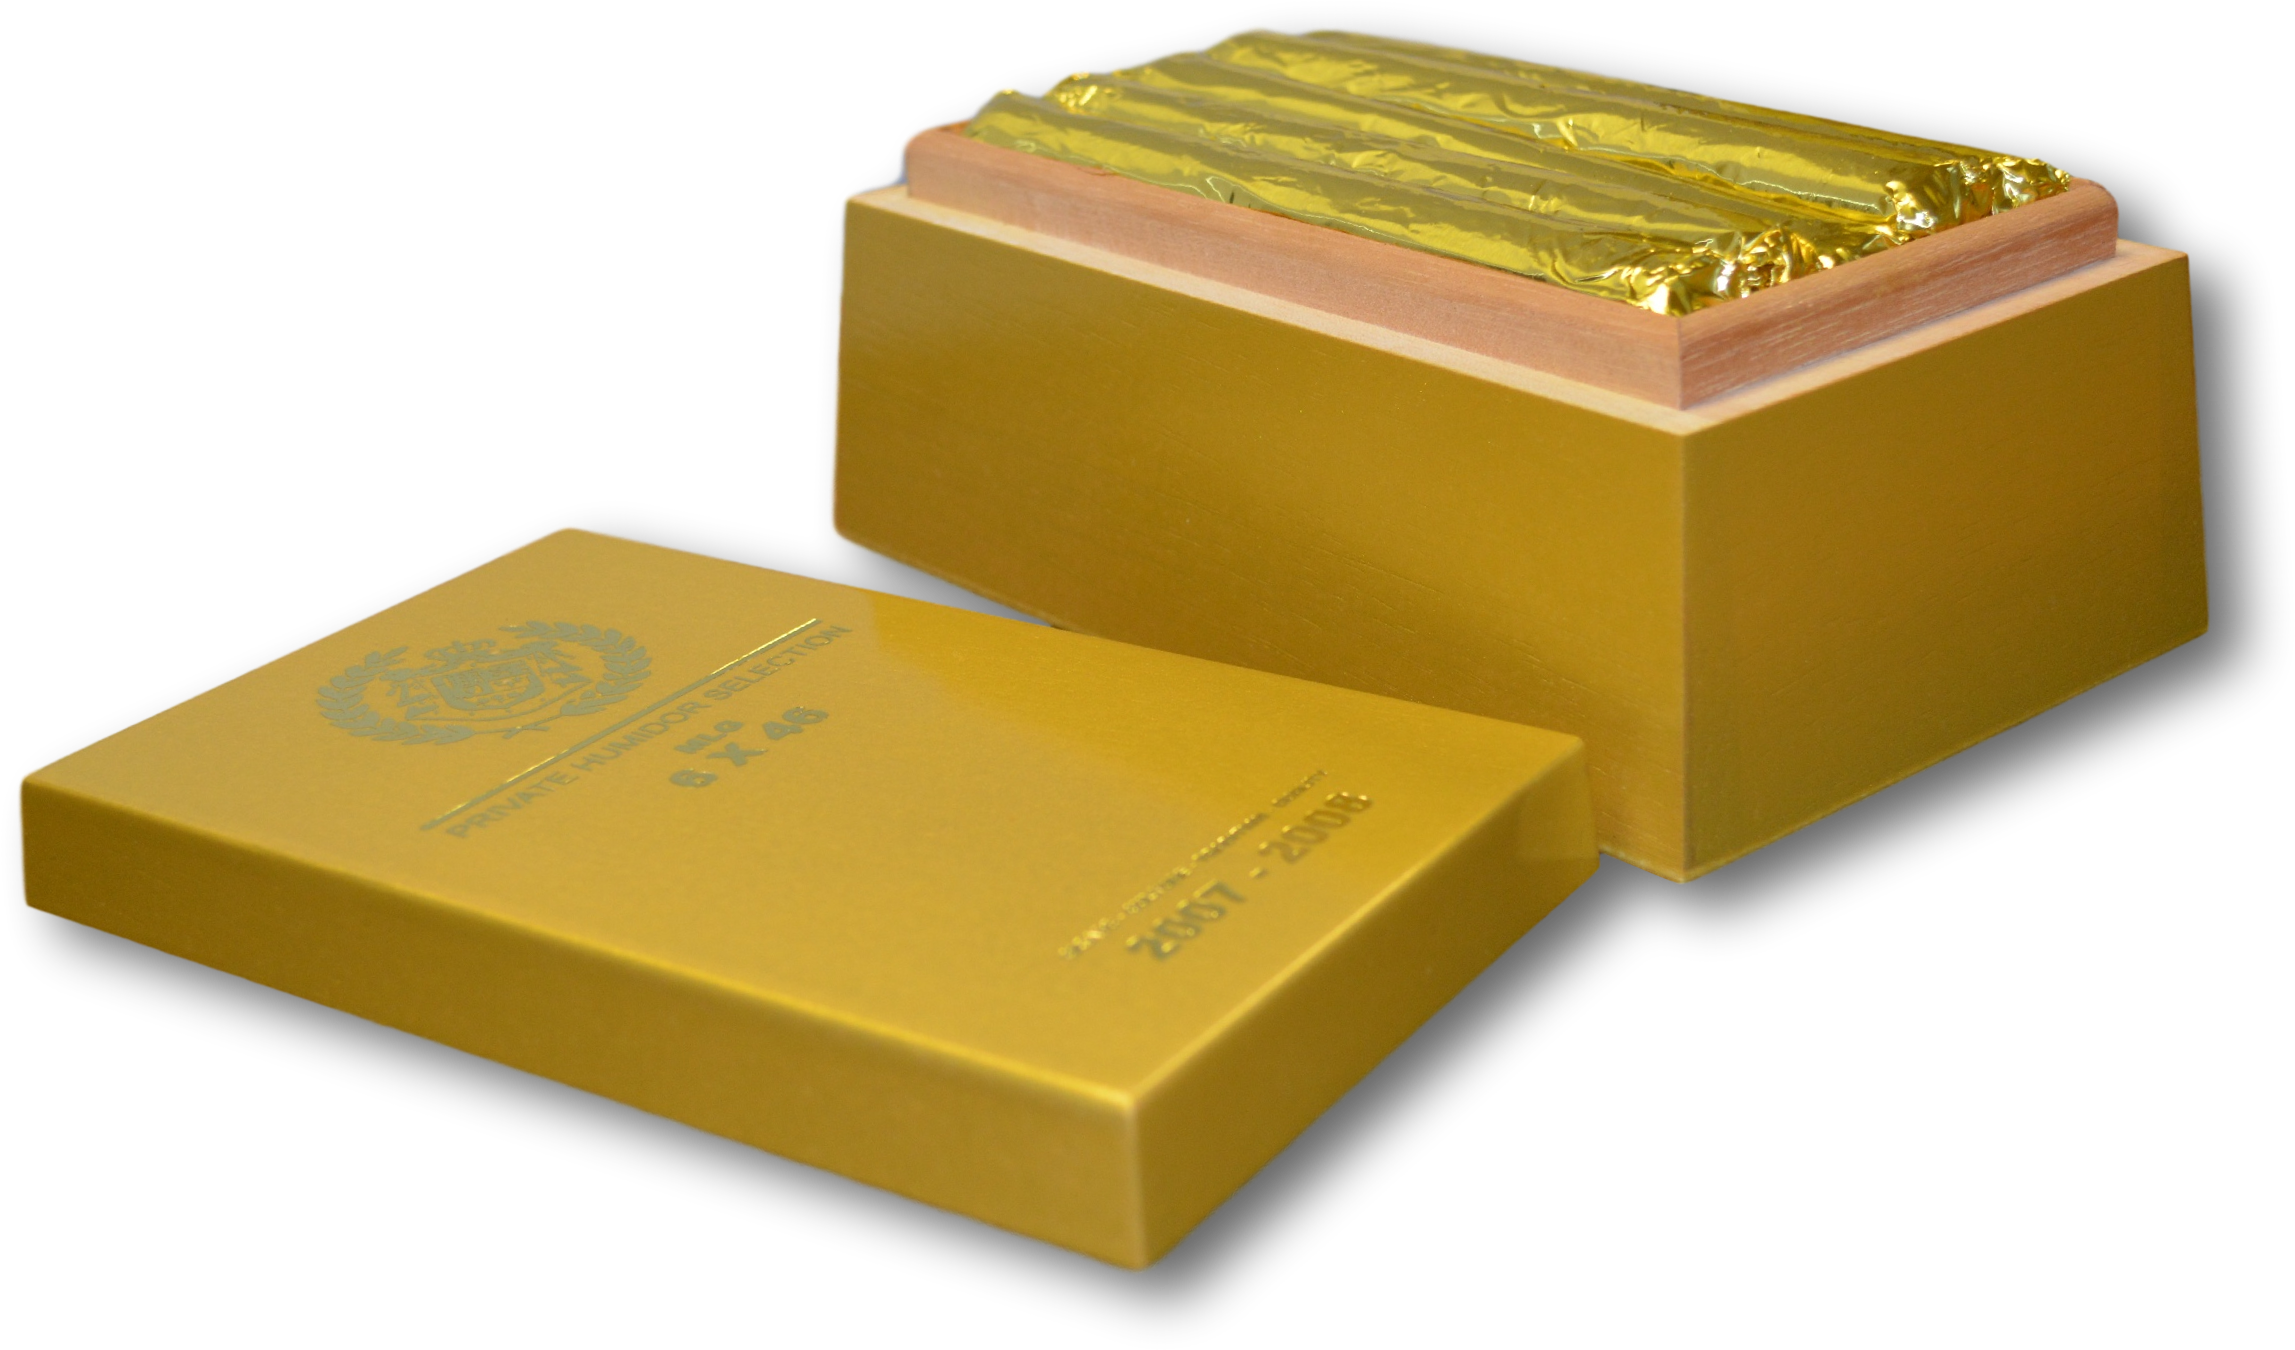 A Gold Rectangular Boxes With A Wooden Top